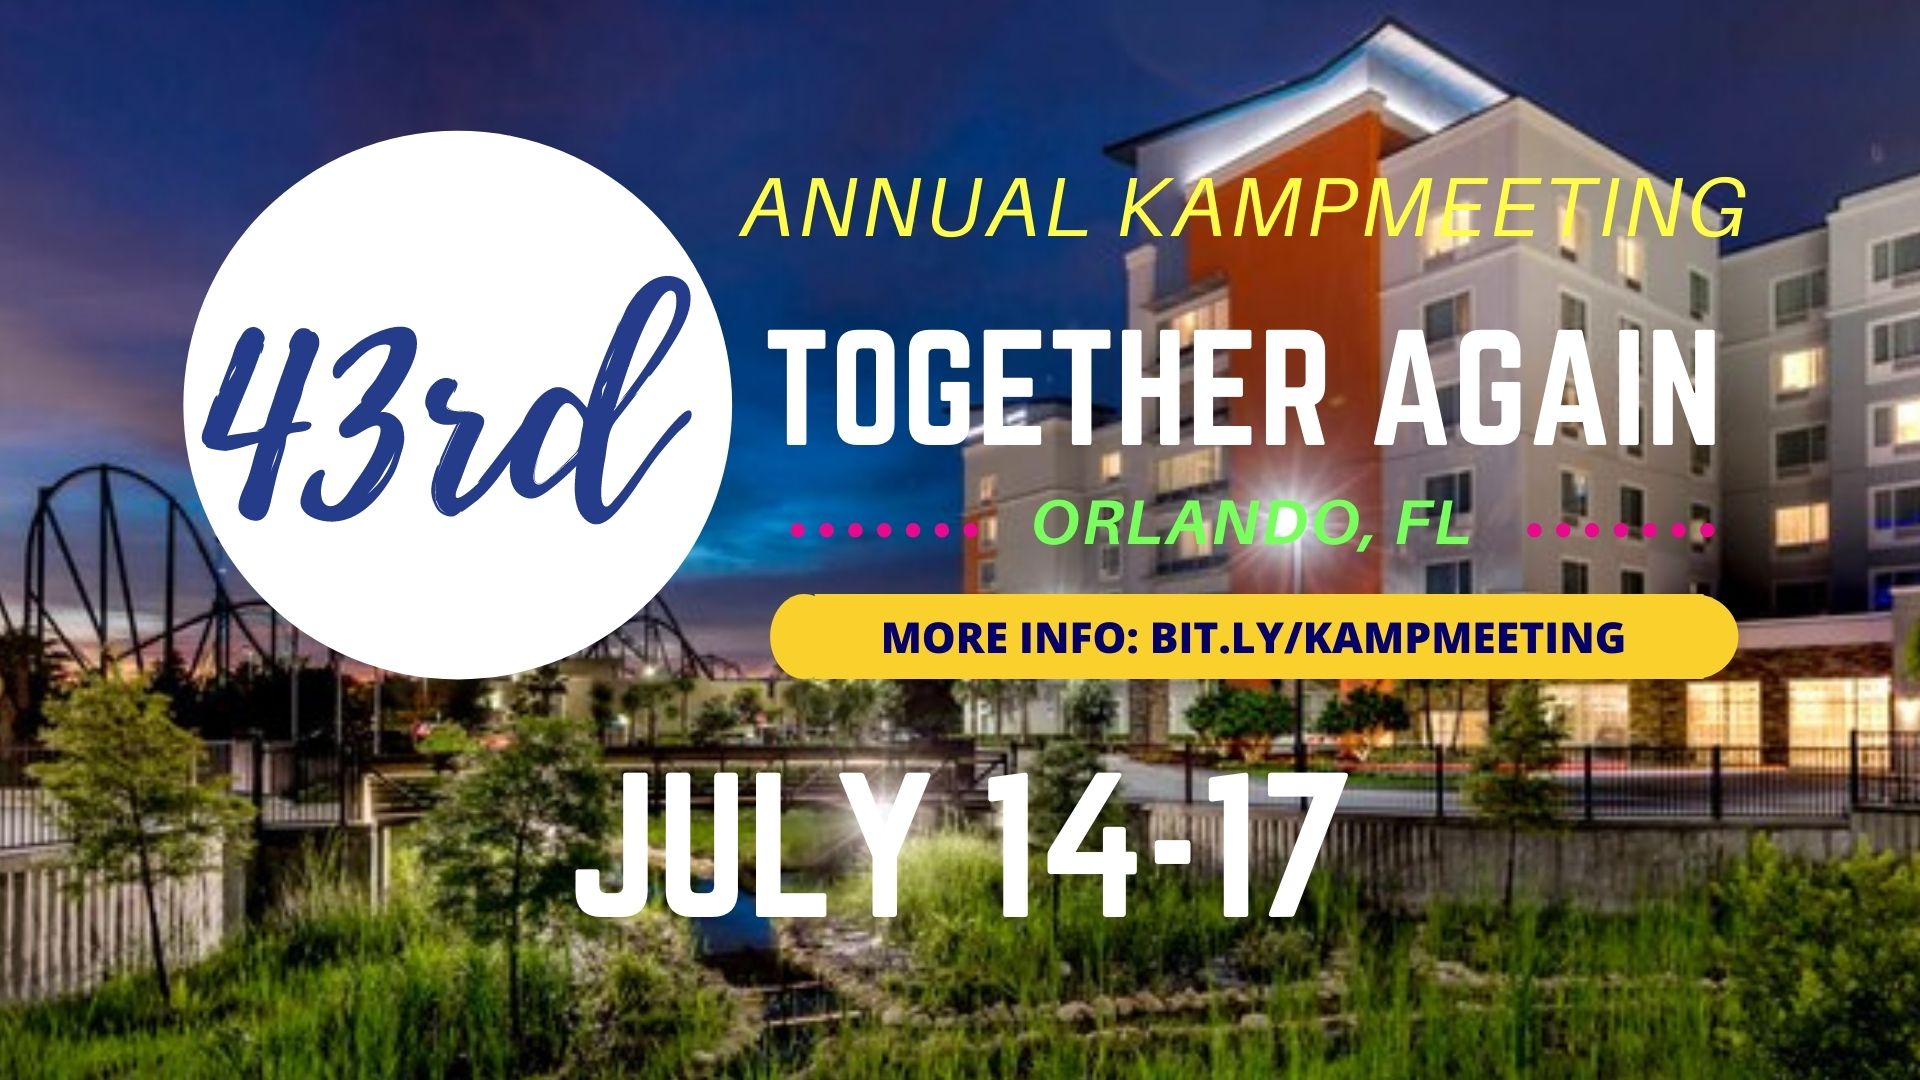 JOIN US FOR KAMPMEETING IN ORLANDO